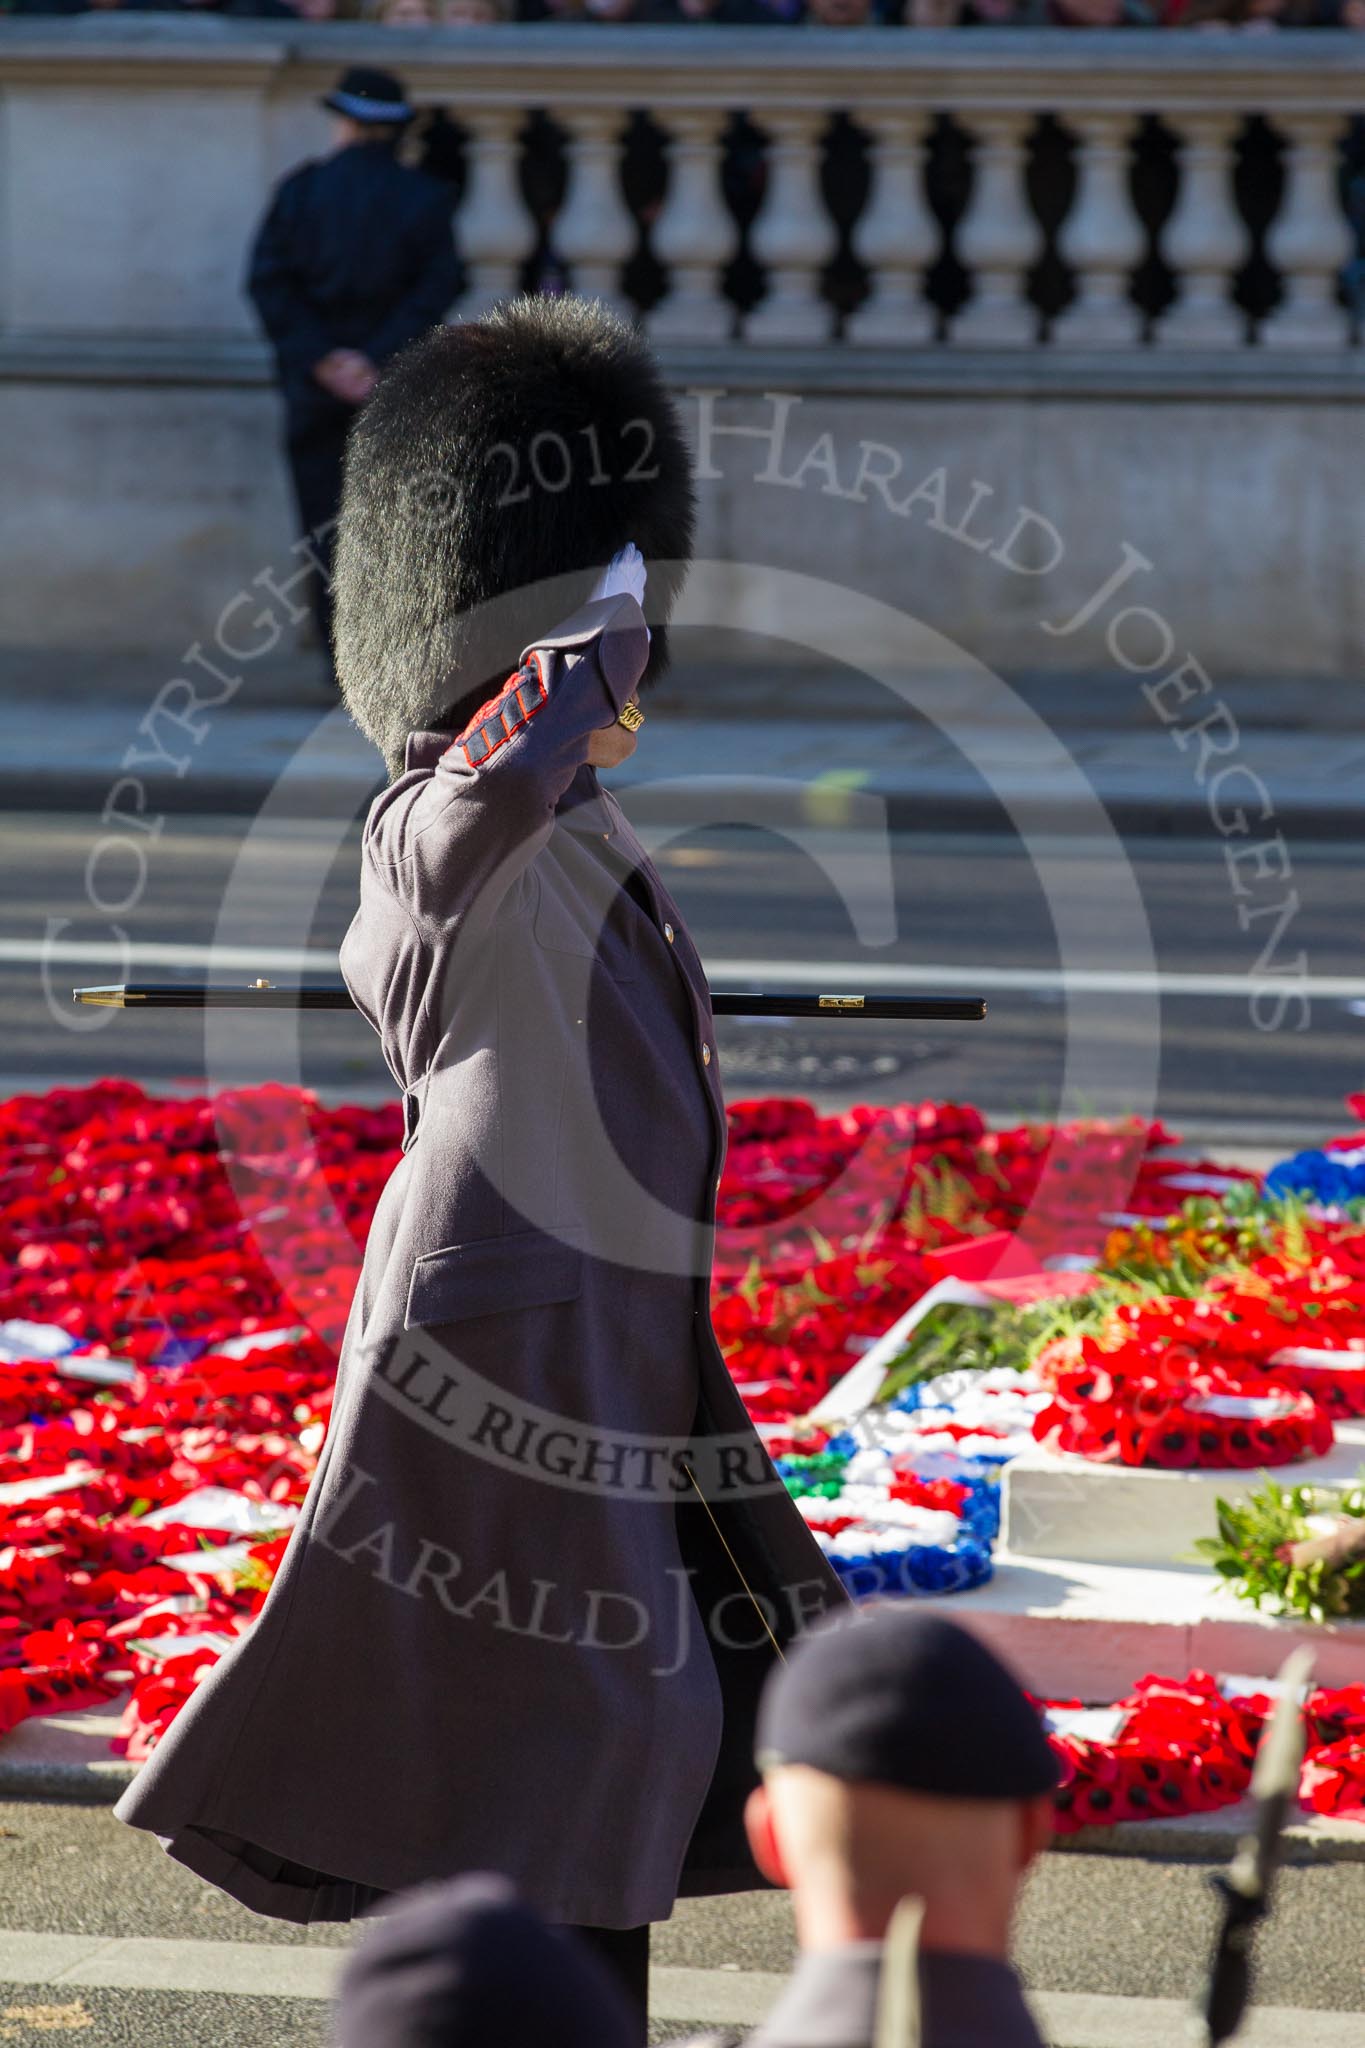 Remembrance Sunday 2012 Cenotaph March Past: Garrison Sergeant Major London District William Mott OBE saluting in front of hundreds of wreaths laid during the March Past at the Cenotaph..
Whitehall, Cenotaph,
London SW1,

United Kingdom,
on 11 November 2012 at 12:26, image #1795